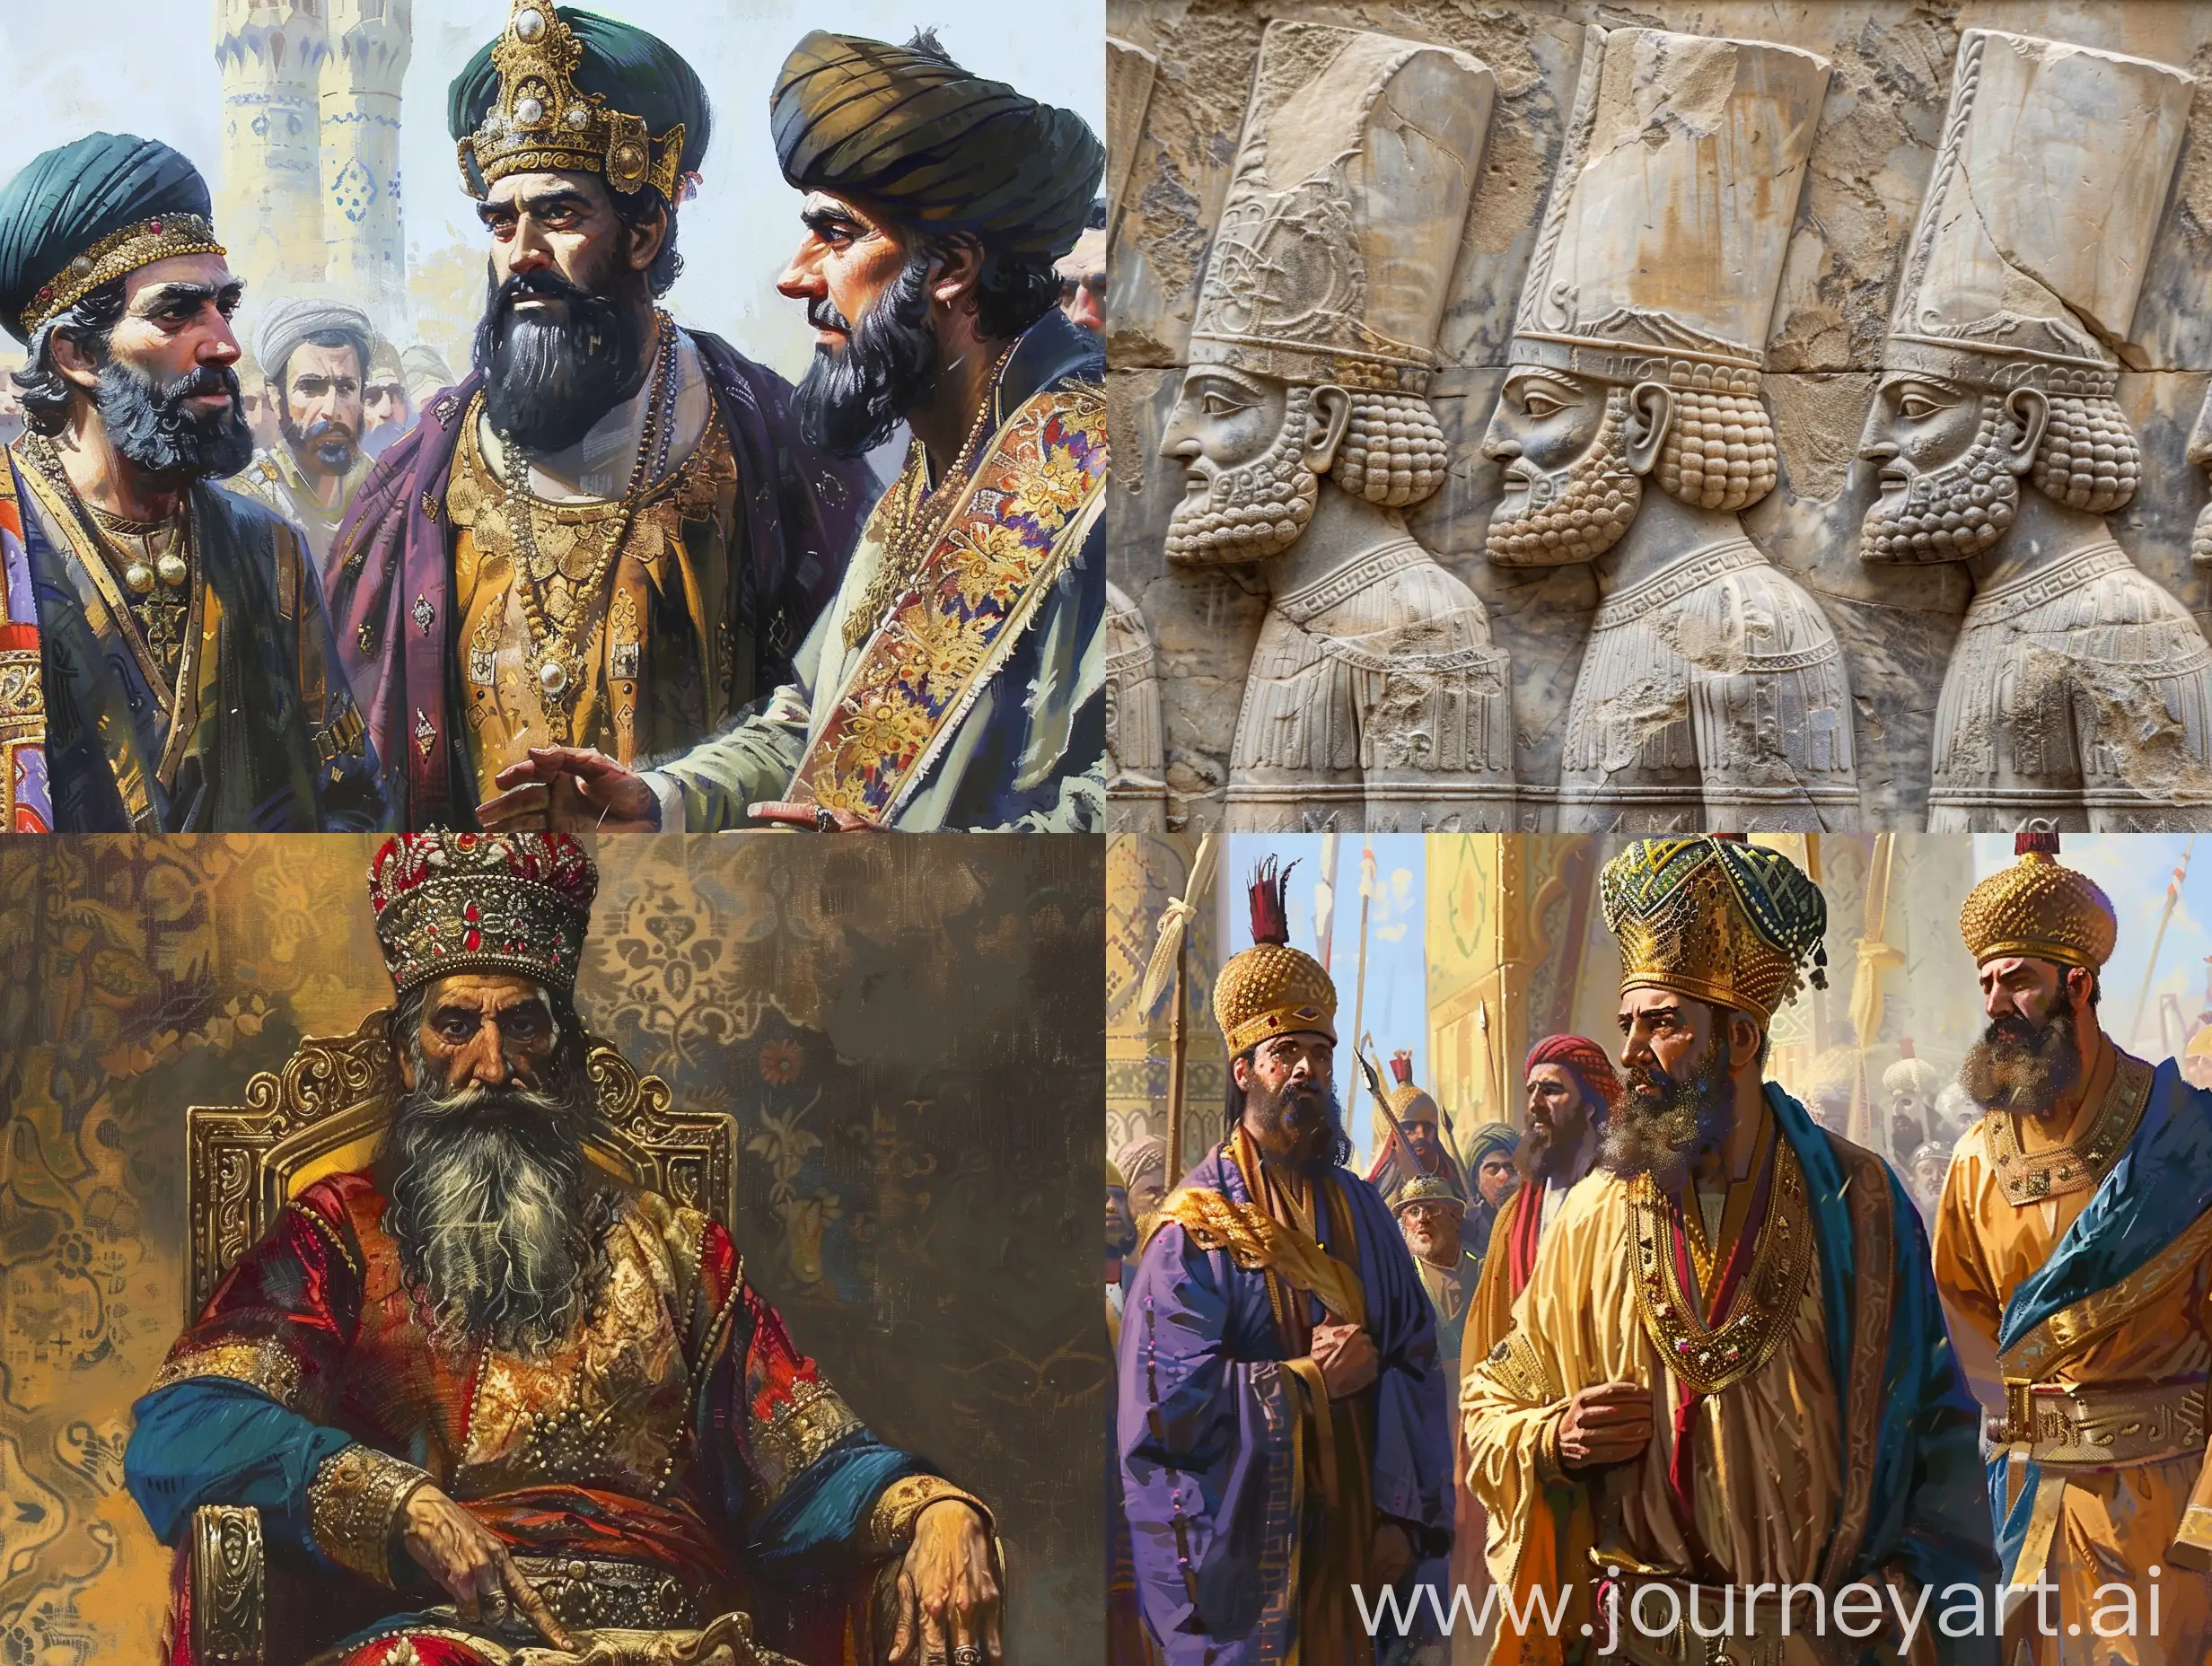 Royalty-of-Ancient-Persia-Iranian-Kings-in-Regal-Attire